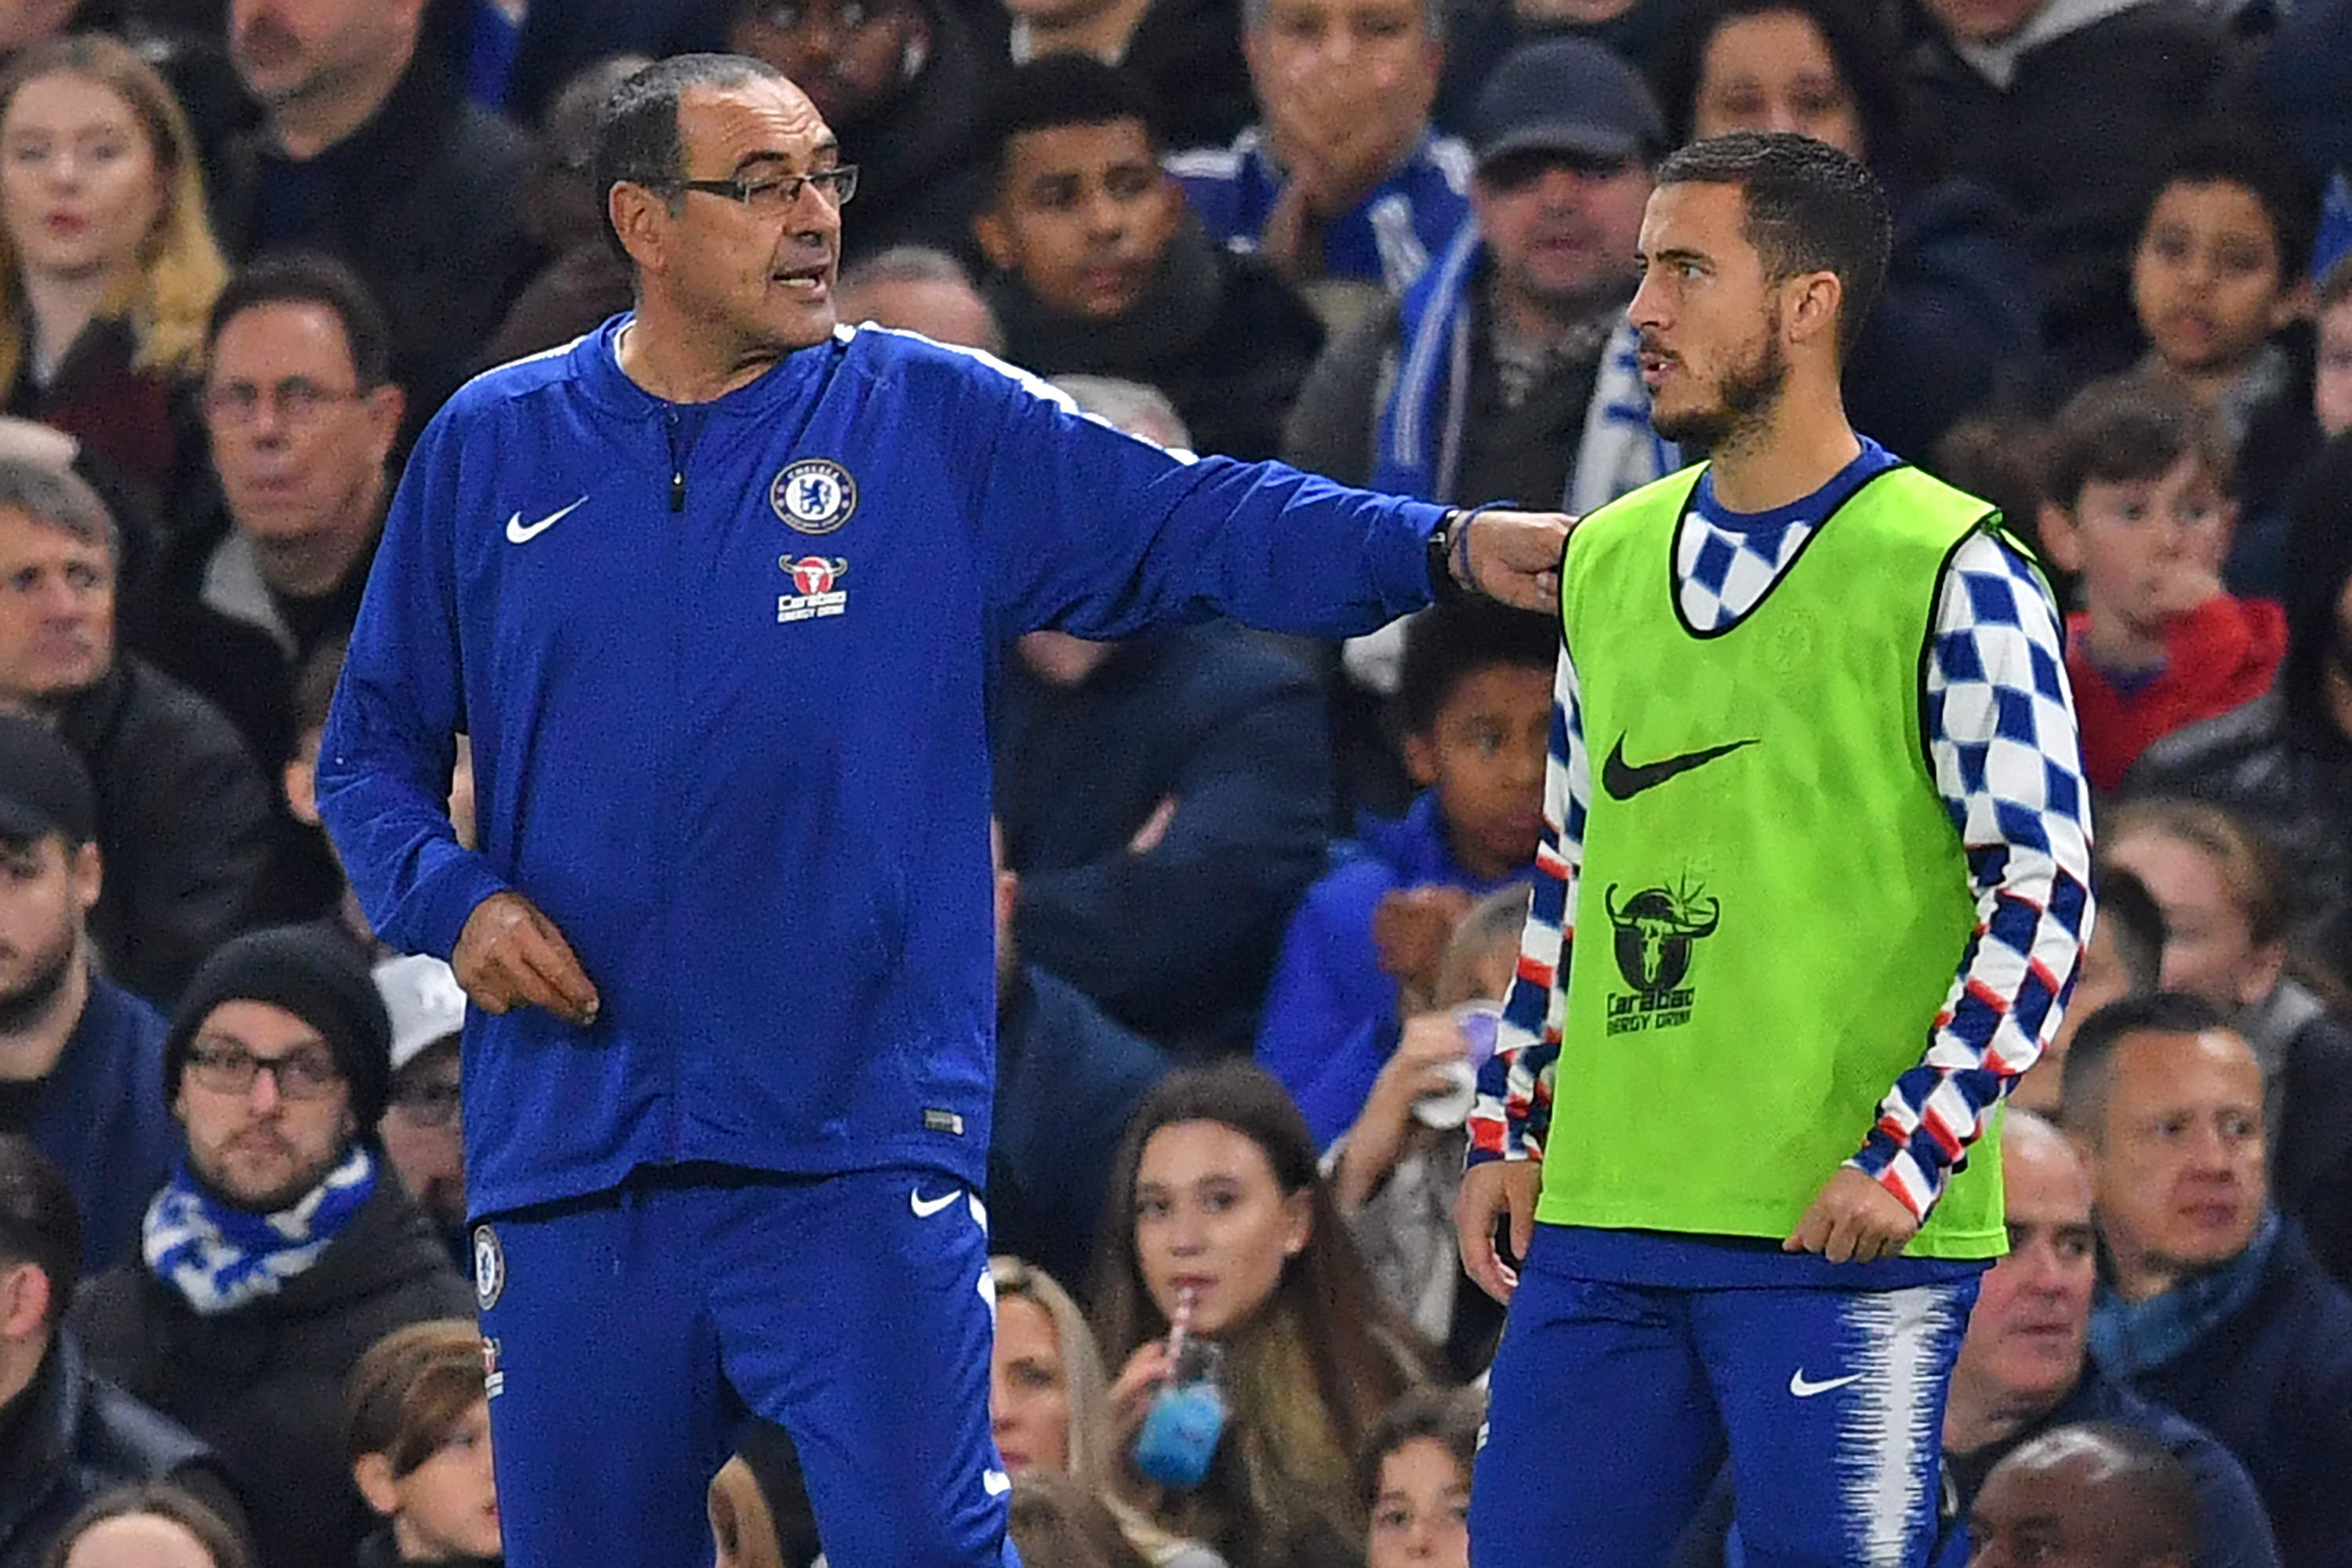 Chelsea's Italian head coach Maurizio Sarri (L) speaks with Chelsea's Belgian midfielder Eden Hazard (R) as he prepares to come on as a substitute during the English Premier League football match between Chelsea and Crystal Palace at Stamford Bridge in London on November 4, 2018. (Photo by Ben STANSALL / AFP) / RESTRICTED TO EDITORIAL USE. No use with unauthorized audio, video, data, fixture lists, club/league logos or 'live' services. Online in-match use limited to 120 images. An additional 40 images may be used in extra time. No video emulation. Social media in-match use limited to 120 images. An additional 40 images may be used in extra time. No use in betting publications, games or single club/league/player publications. /         (Photo credit should read BEN STANSALL/AFP/Getty Images)